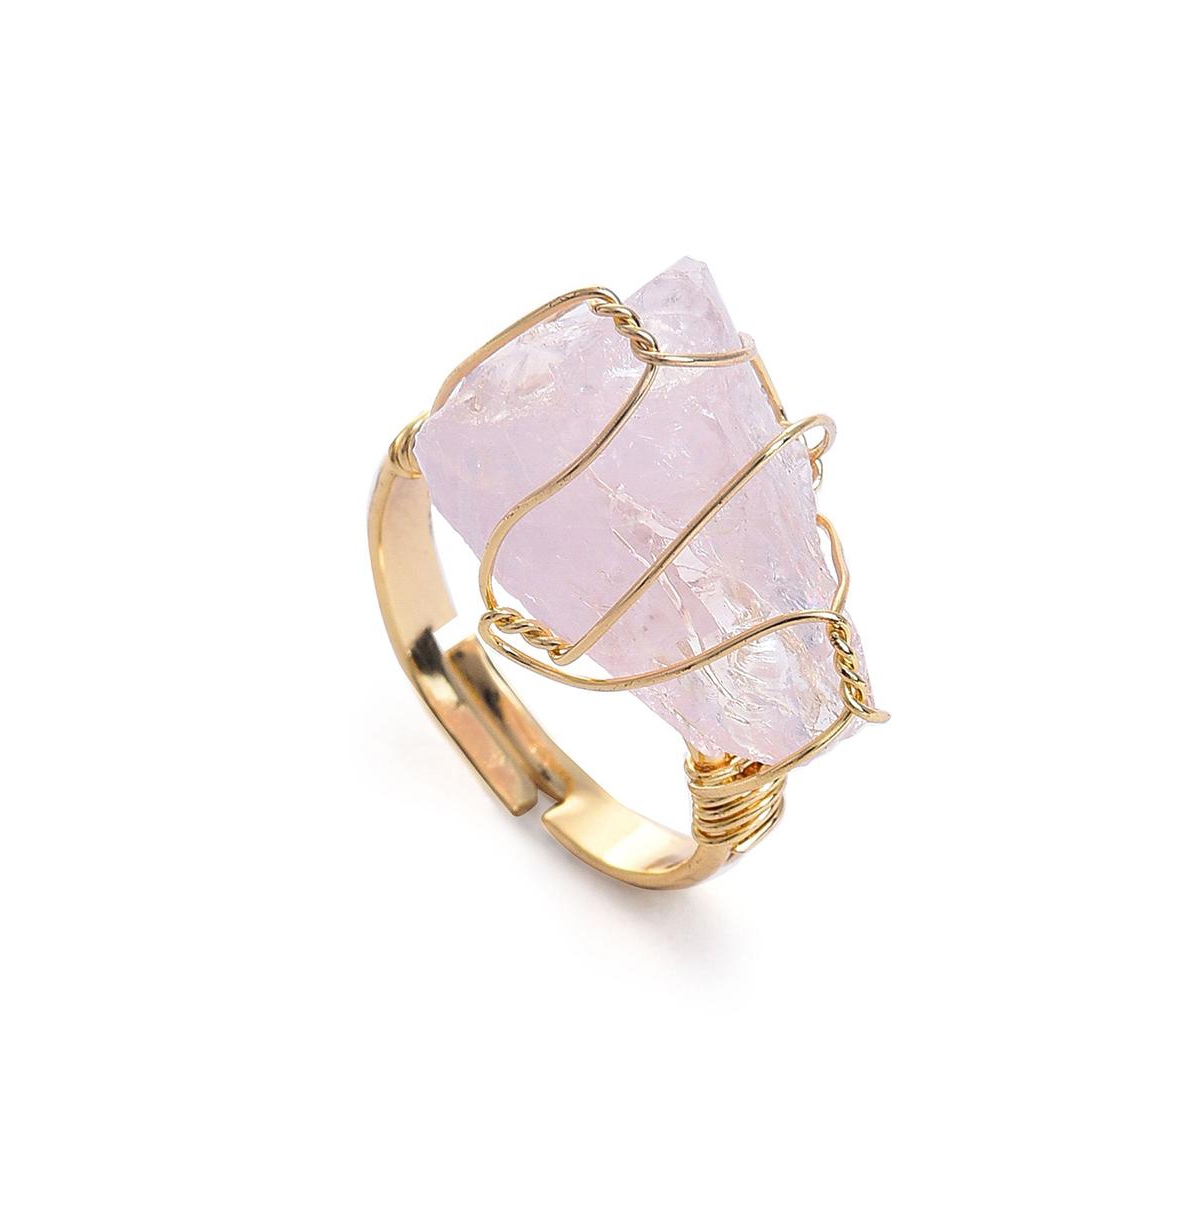 Women's White Abstract Stone Cocktail Ring - White